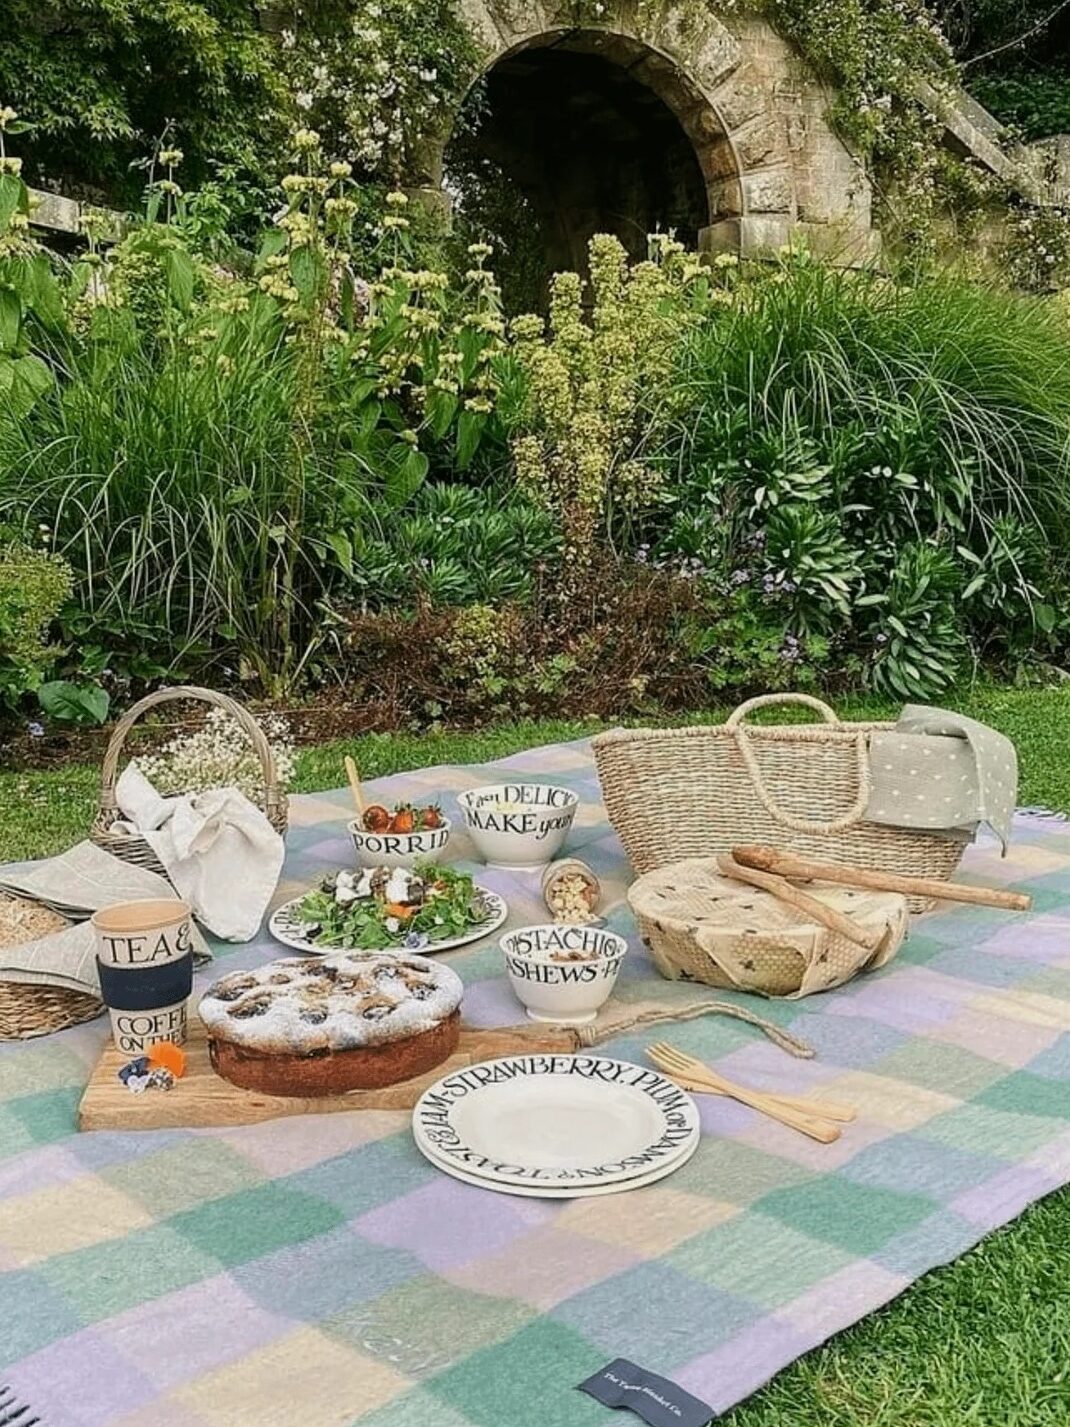 Sustainable picnic blankets